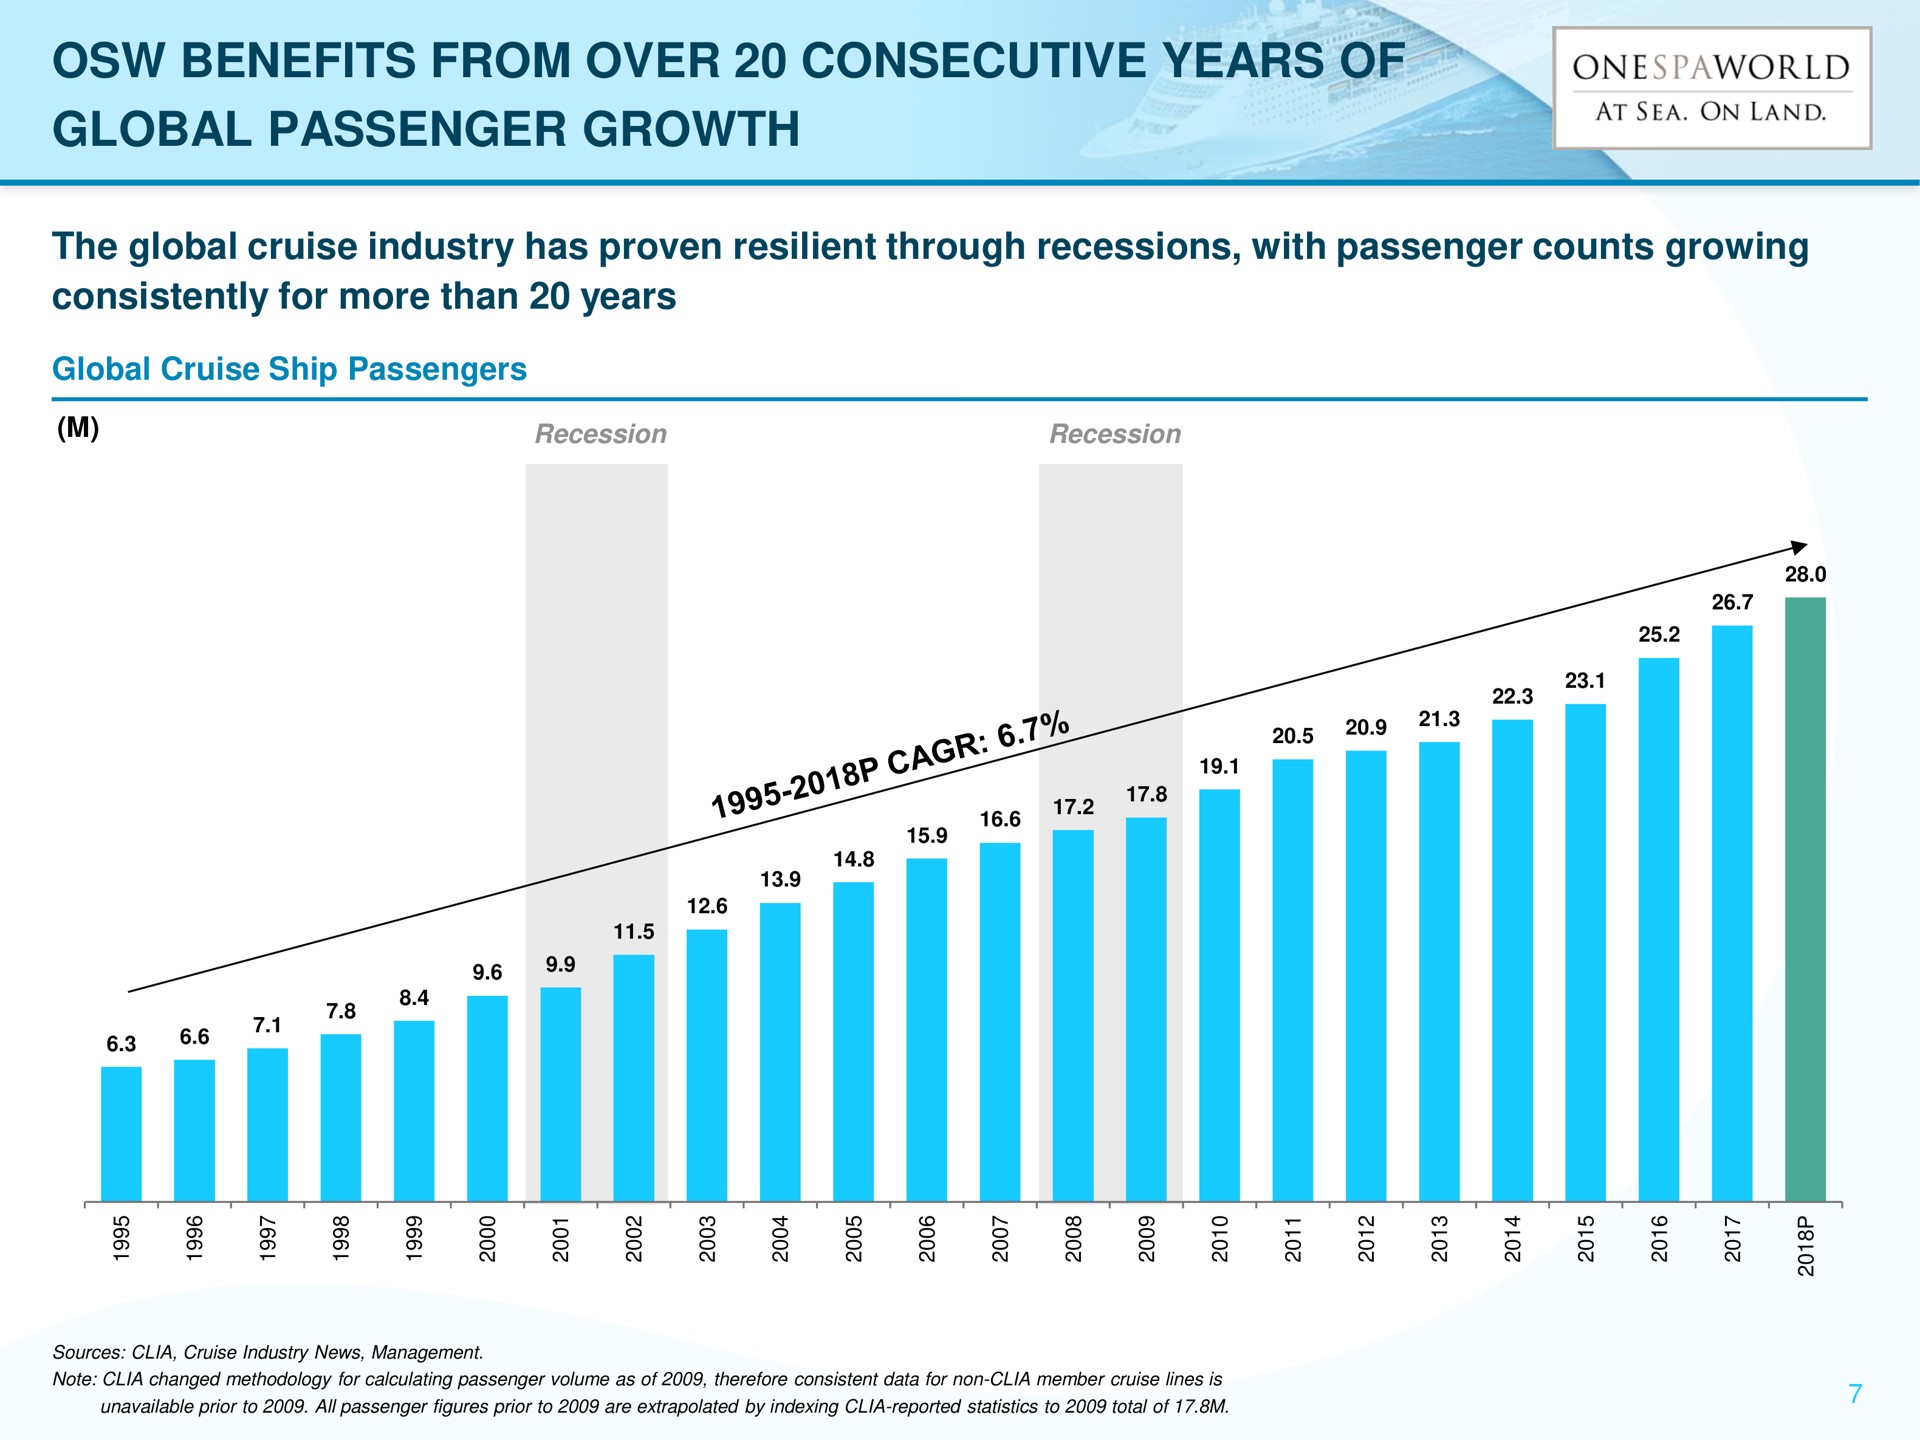 benefits from over consecutive years of global passenger growth | OnesSpaWorld